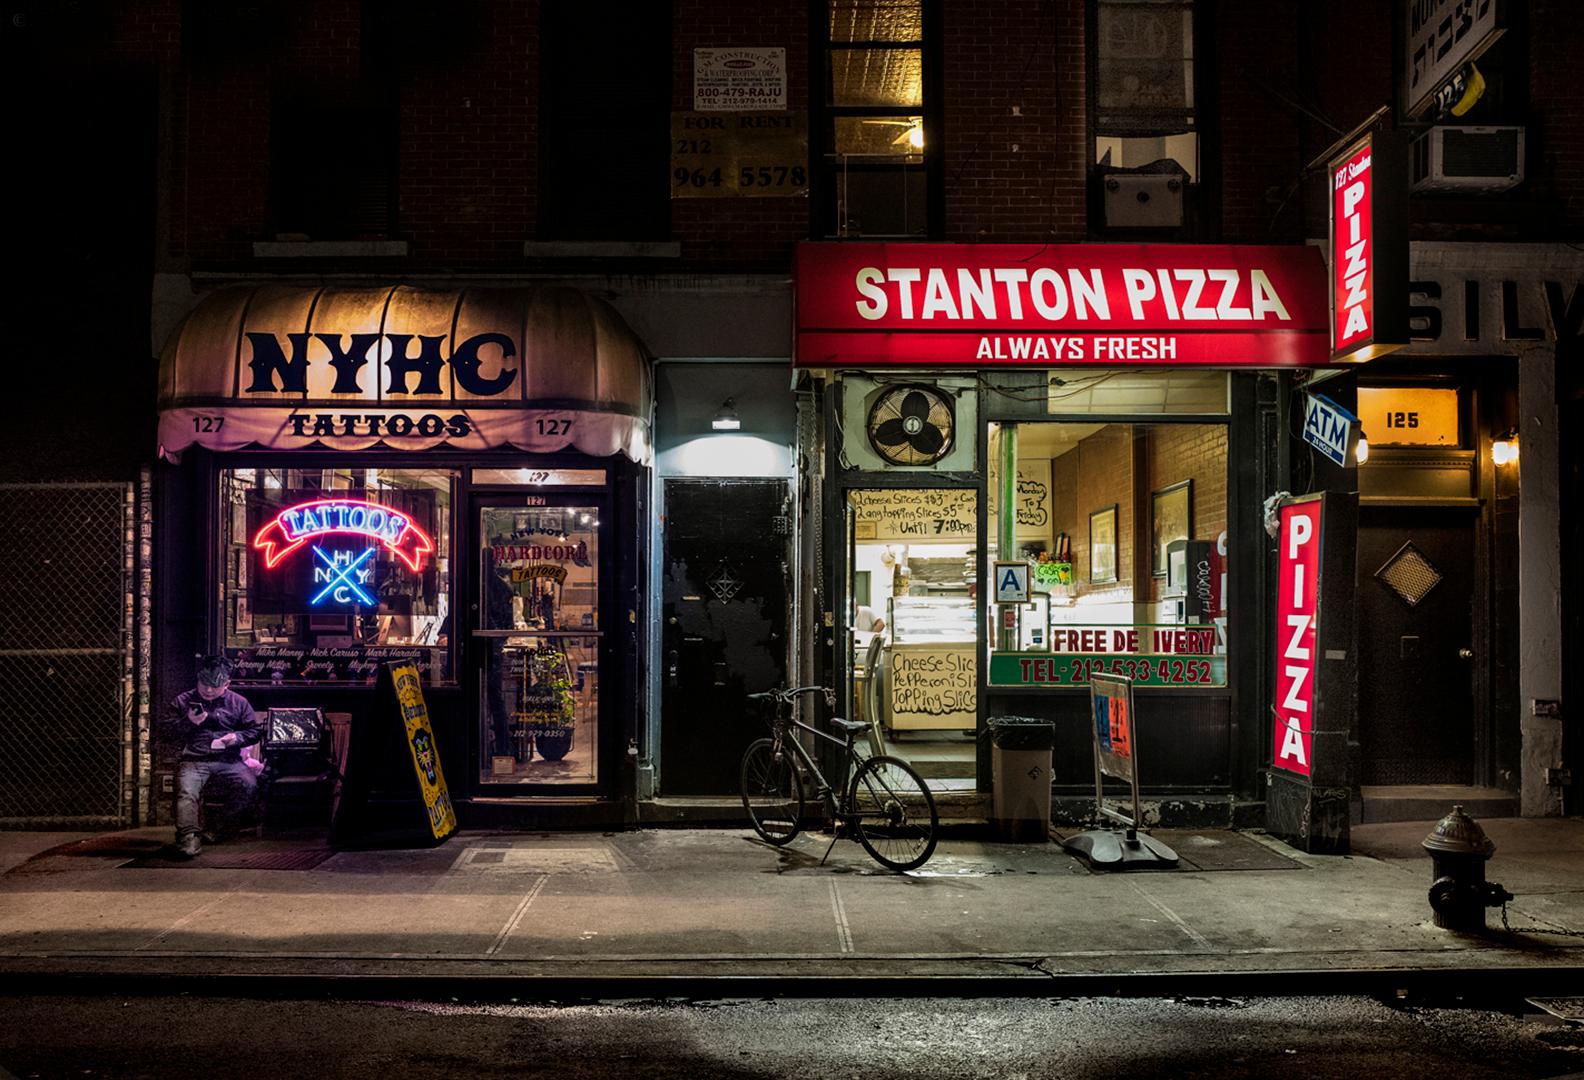 Artist: Sally Davies (1956)
Title: Stanton Pizza (New York City)
Year: 2022
Medium: Inkjet print on archival paper
Edition: 12, plus proofs
Size: 17 x 22 inches
Condition: Excellent
Inscription: Signed, dated, titled by the artist
Notes: This